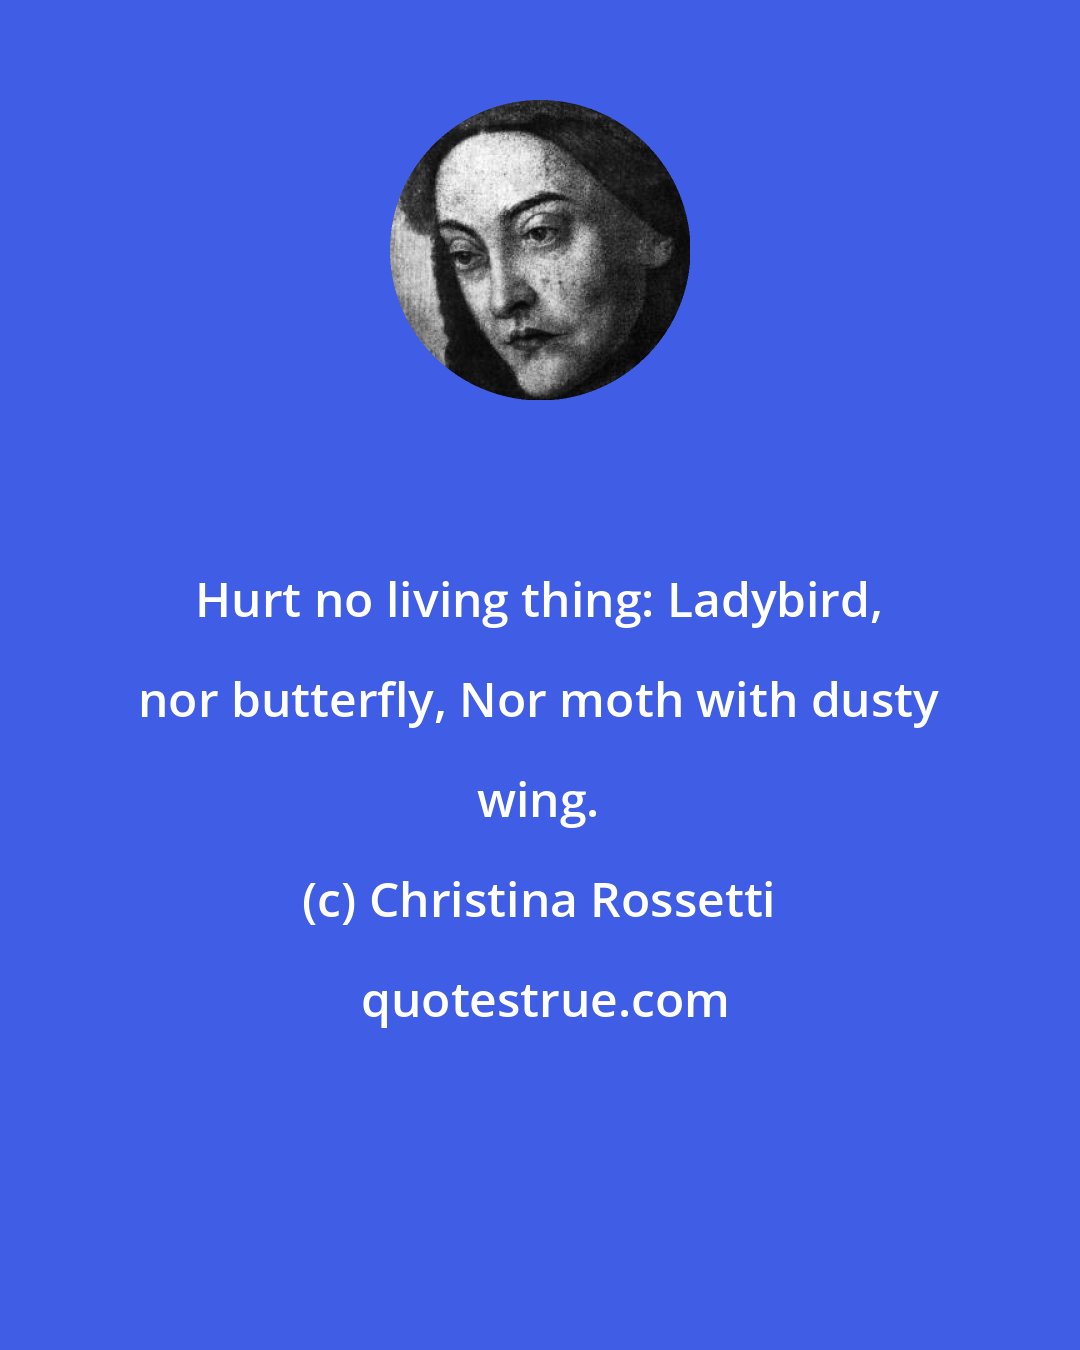 Christina Rossetti: Hurt no living thing: Ladybird, nor butterfly, Nor moth with dusty wing.